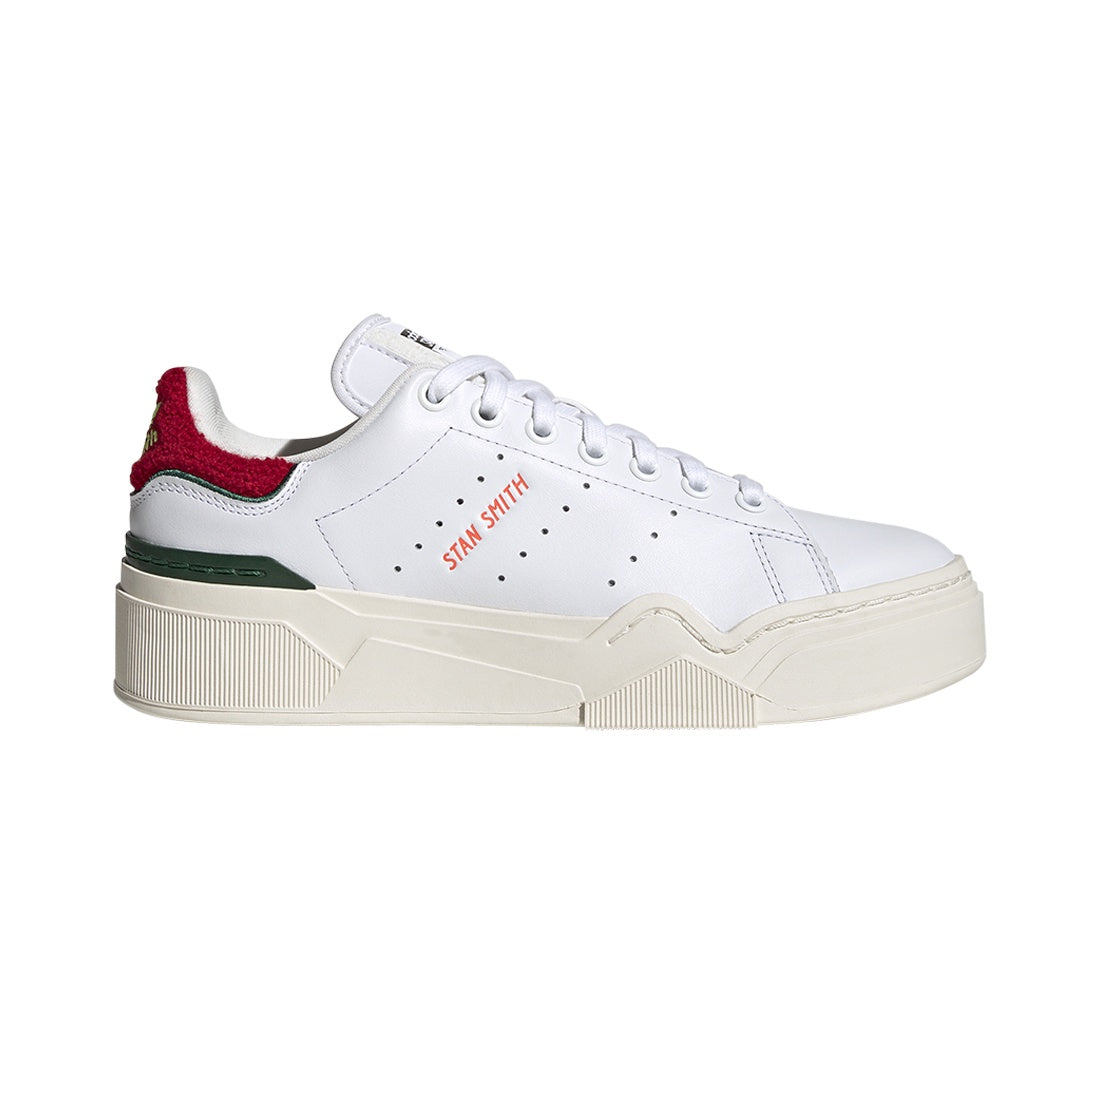 STAN SMITH HER ICONS BBALL W COLLEGIATE GREEN